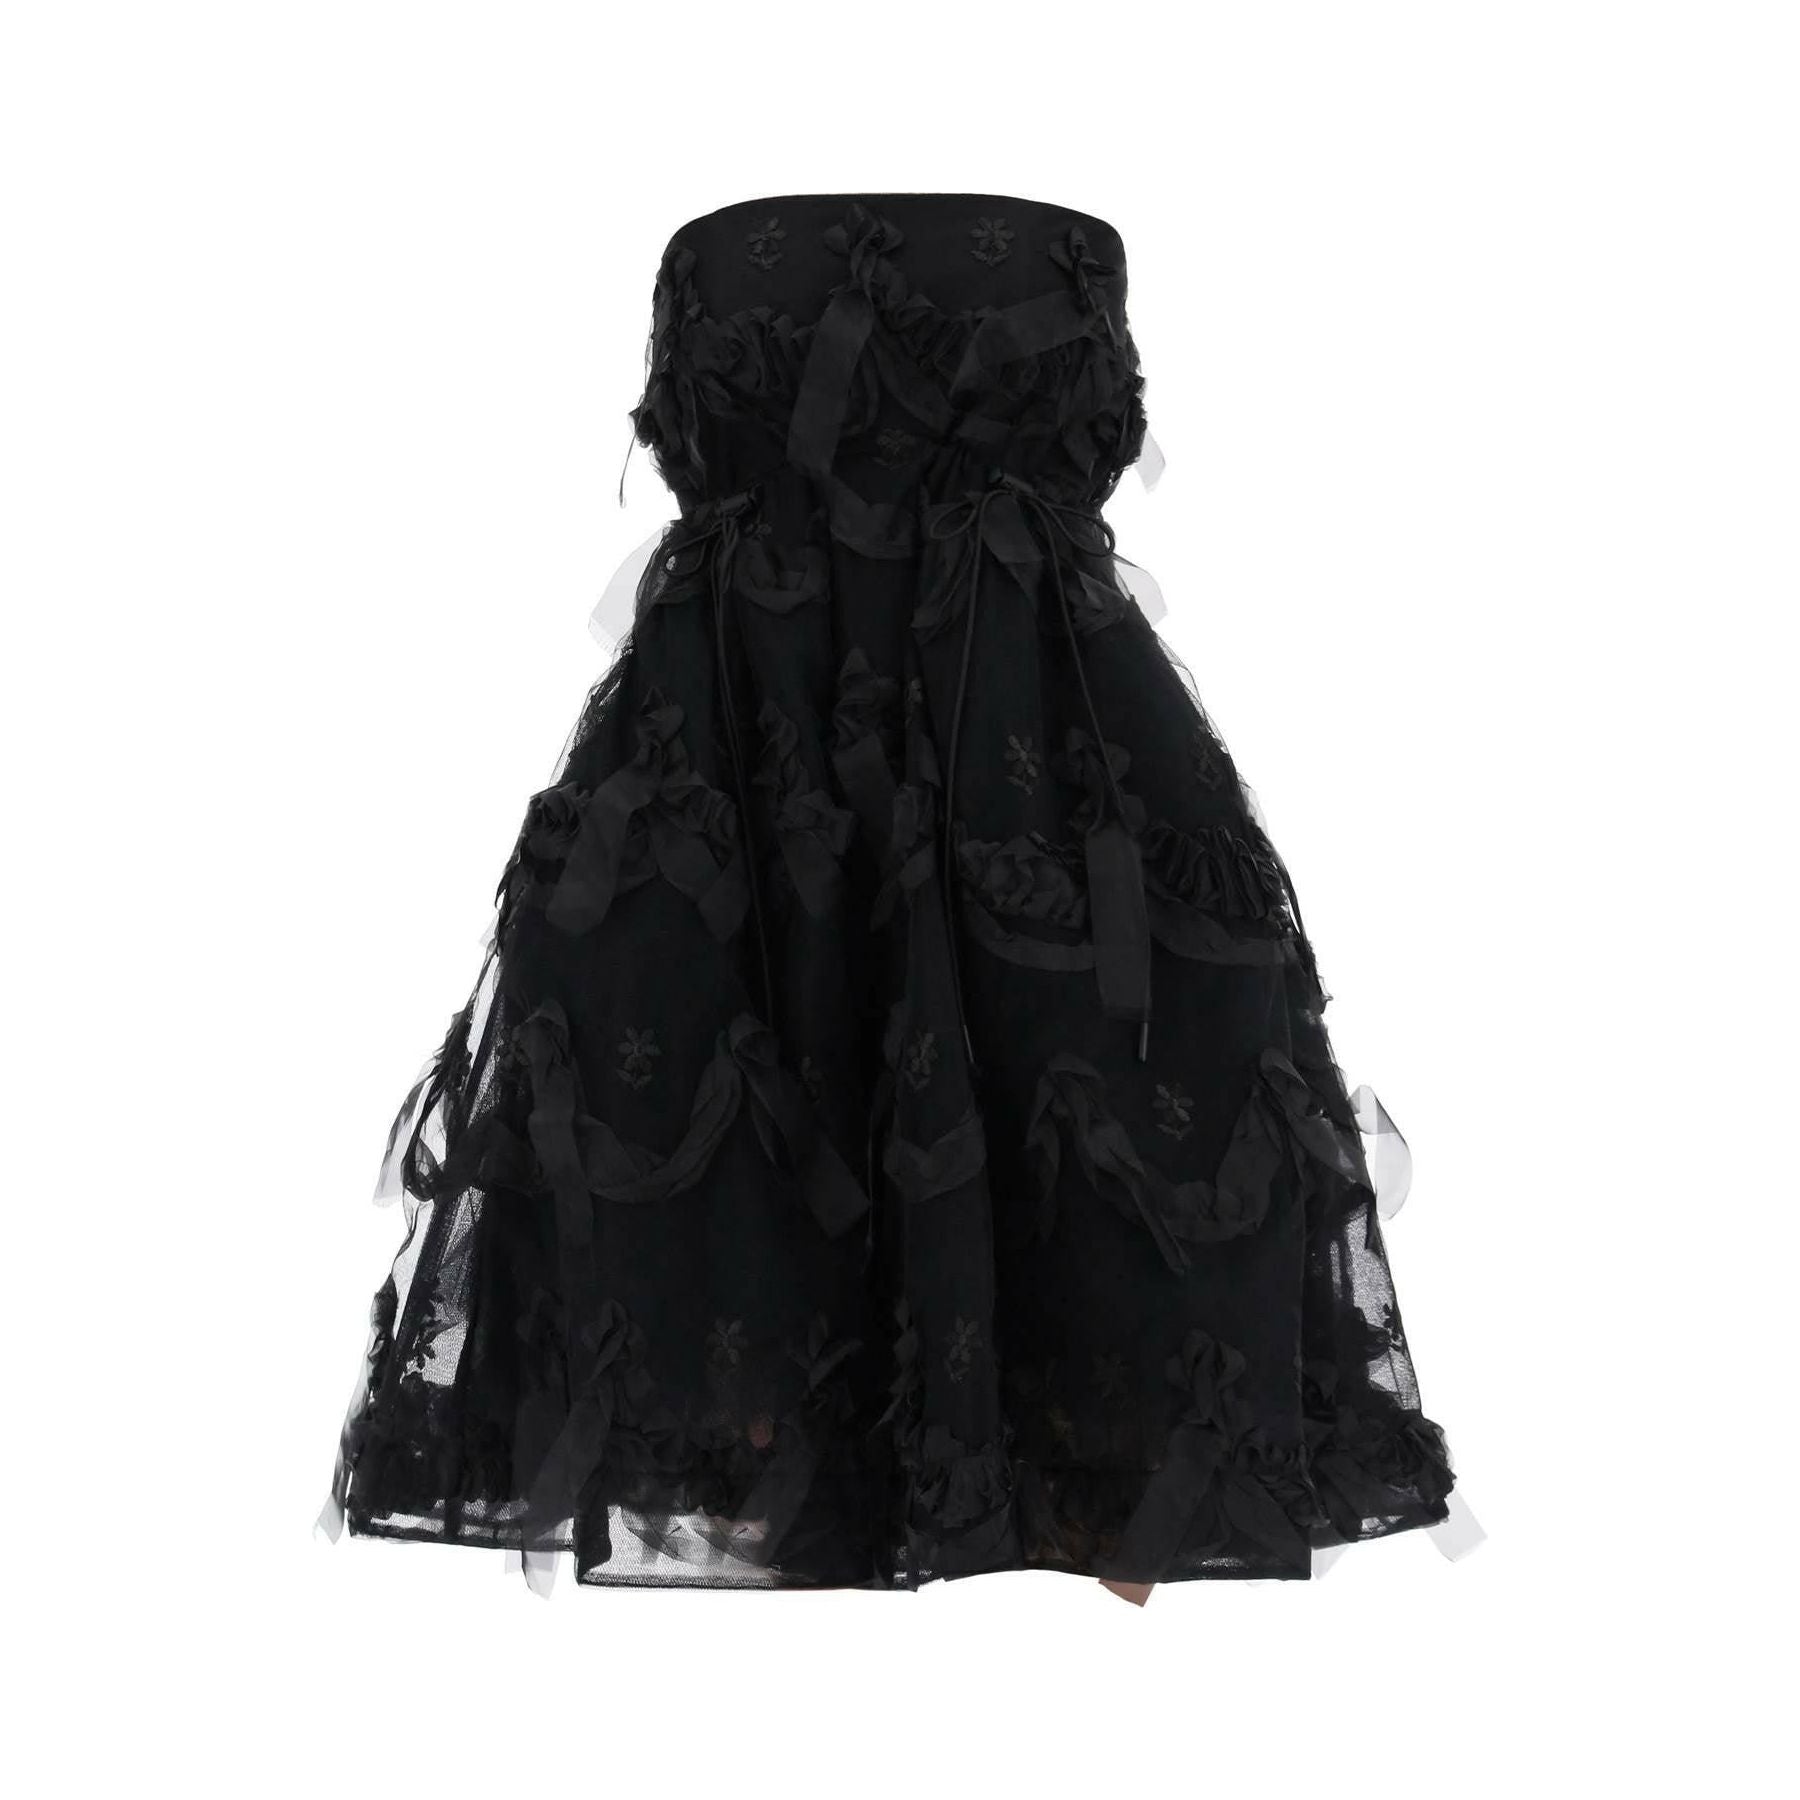 Black Tulle Dress With Bows And Embroidery SIMONE ROCHA JOHN JULIA.